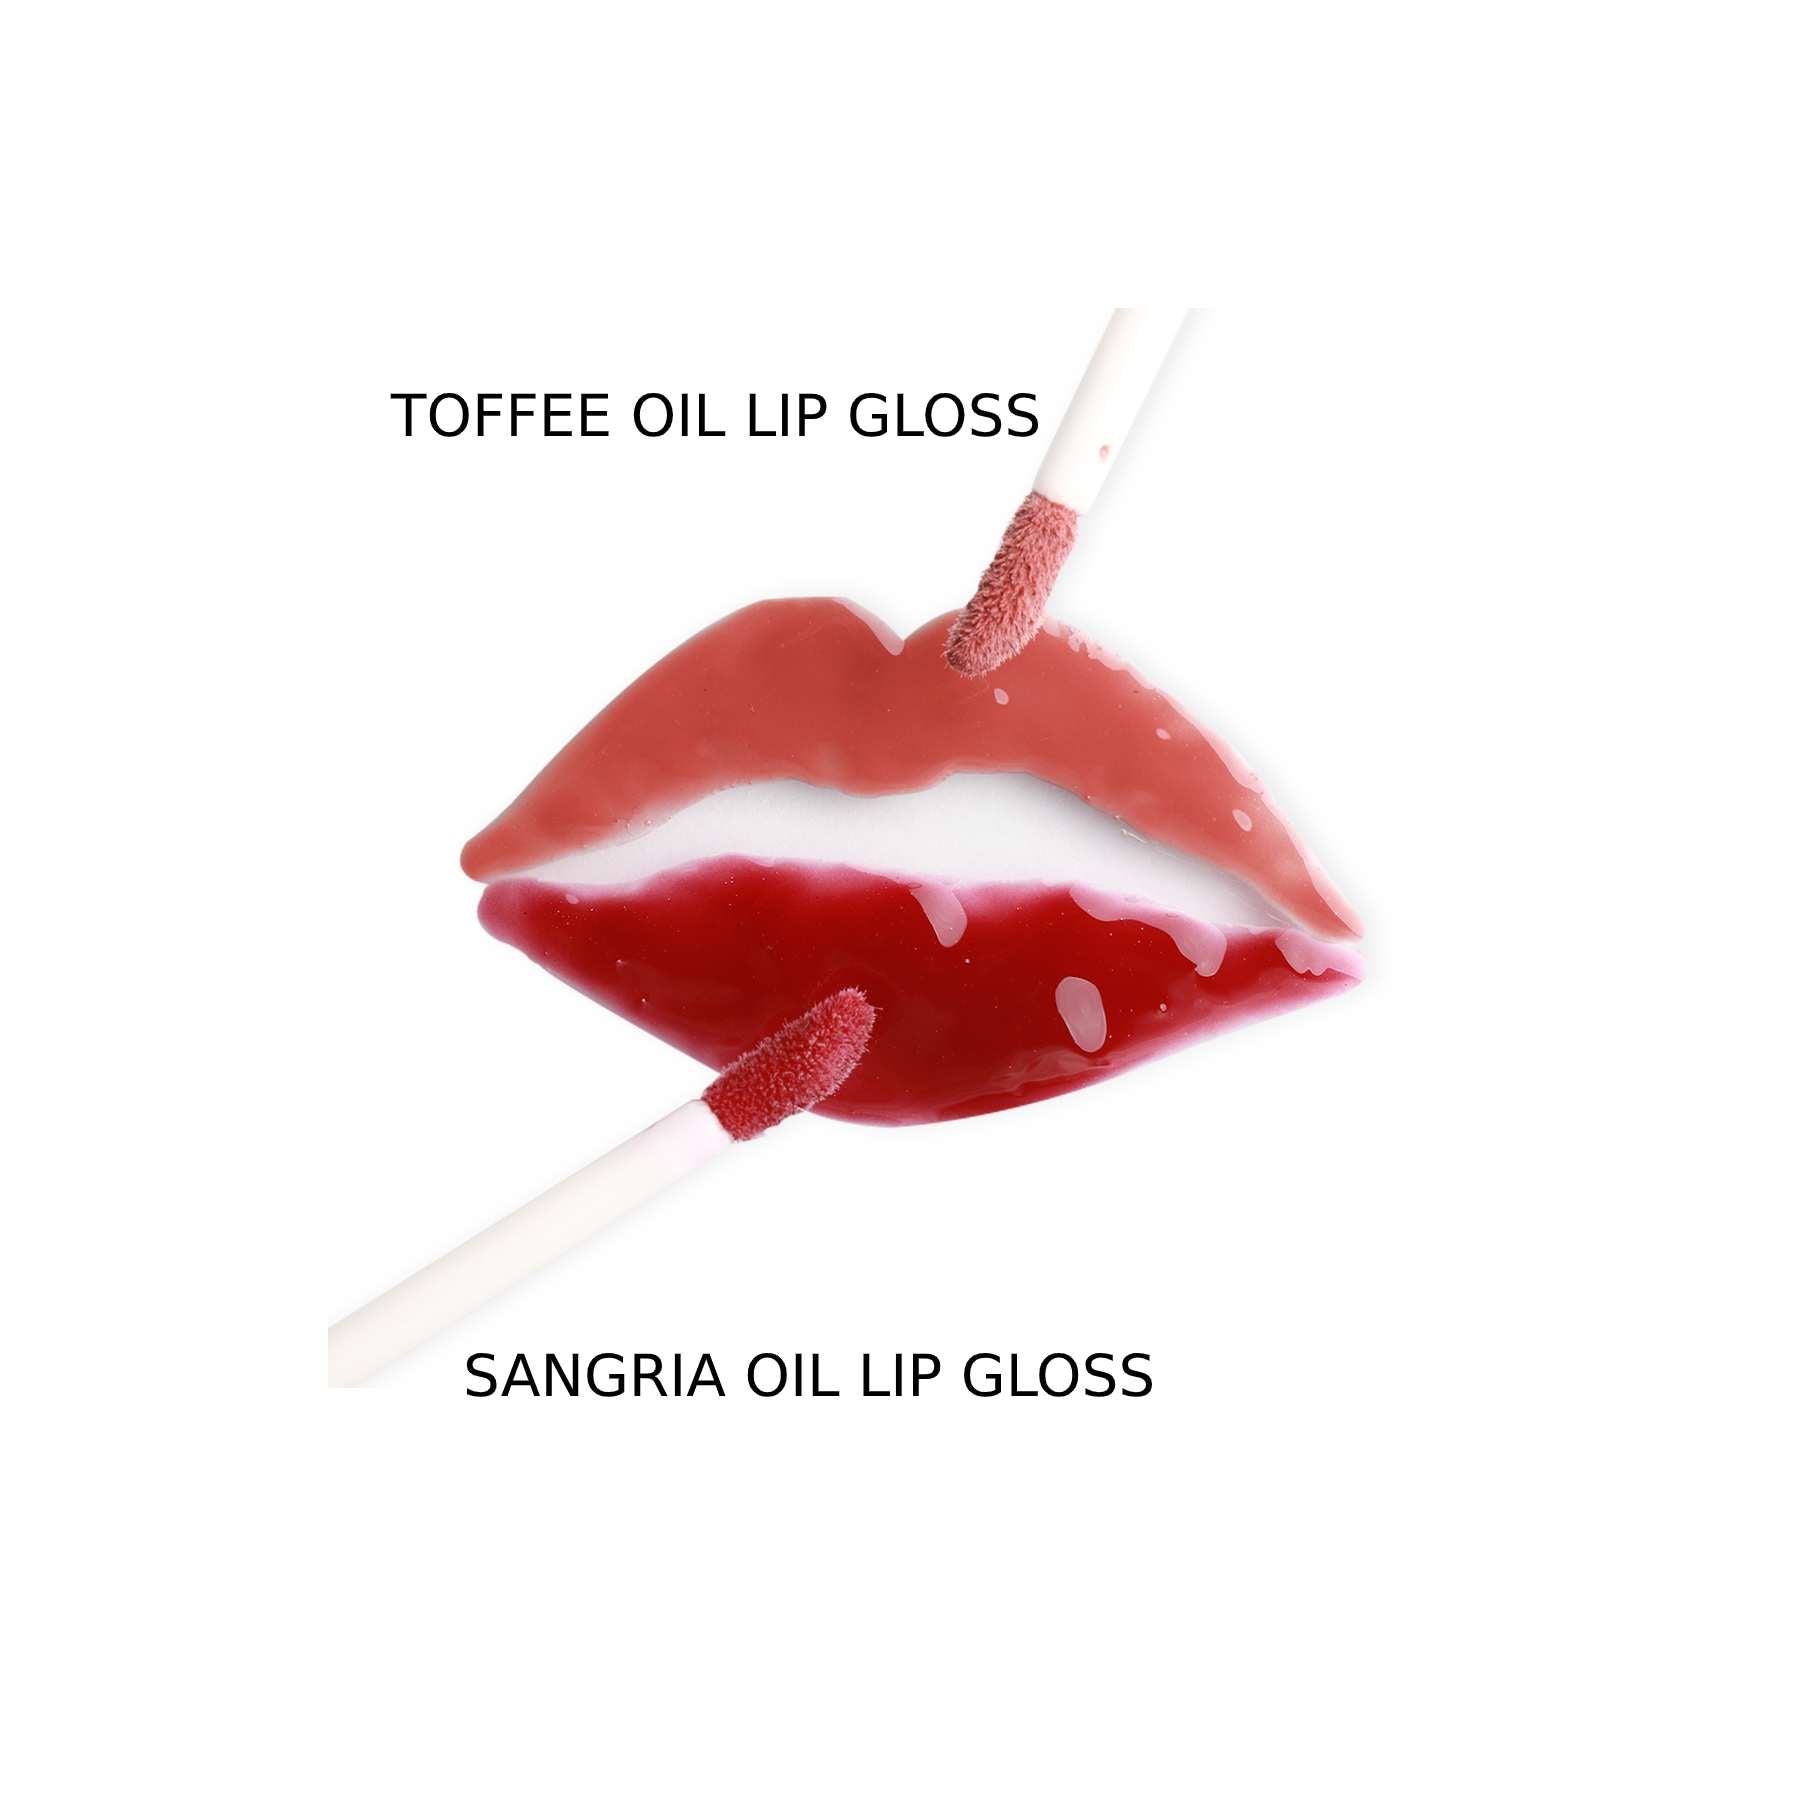 Shop Ruby's Organics Toffee - Lip Oil Gloss on Sublime Life. A 2 in 1 Lip Balm and Gloss that moisturises and hydrates lips